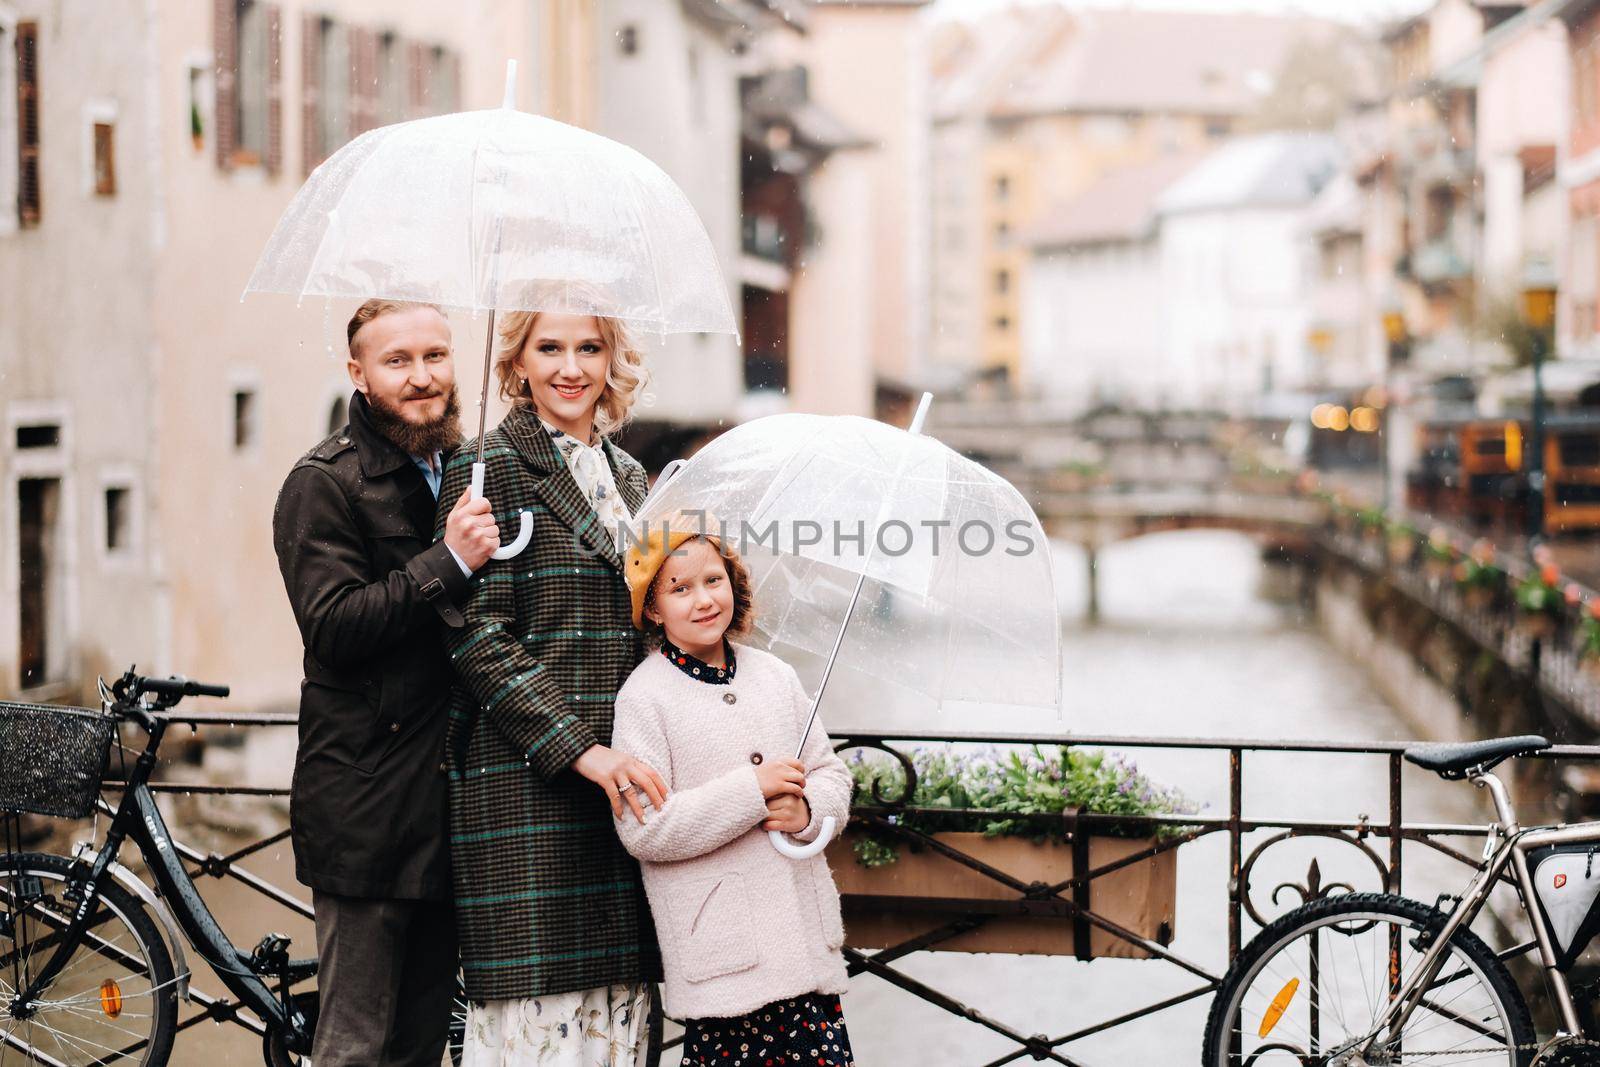 Beautiful family with umbrellas in rainy weather in Annecy. France.Family walk in the rain by Lobachad